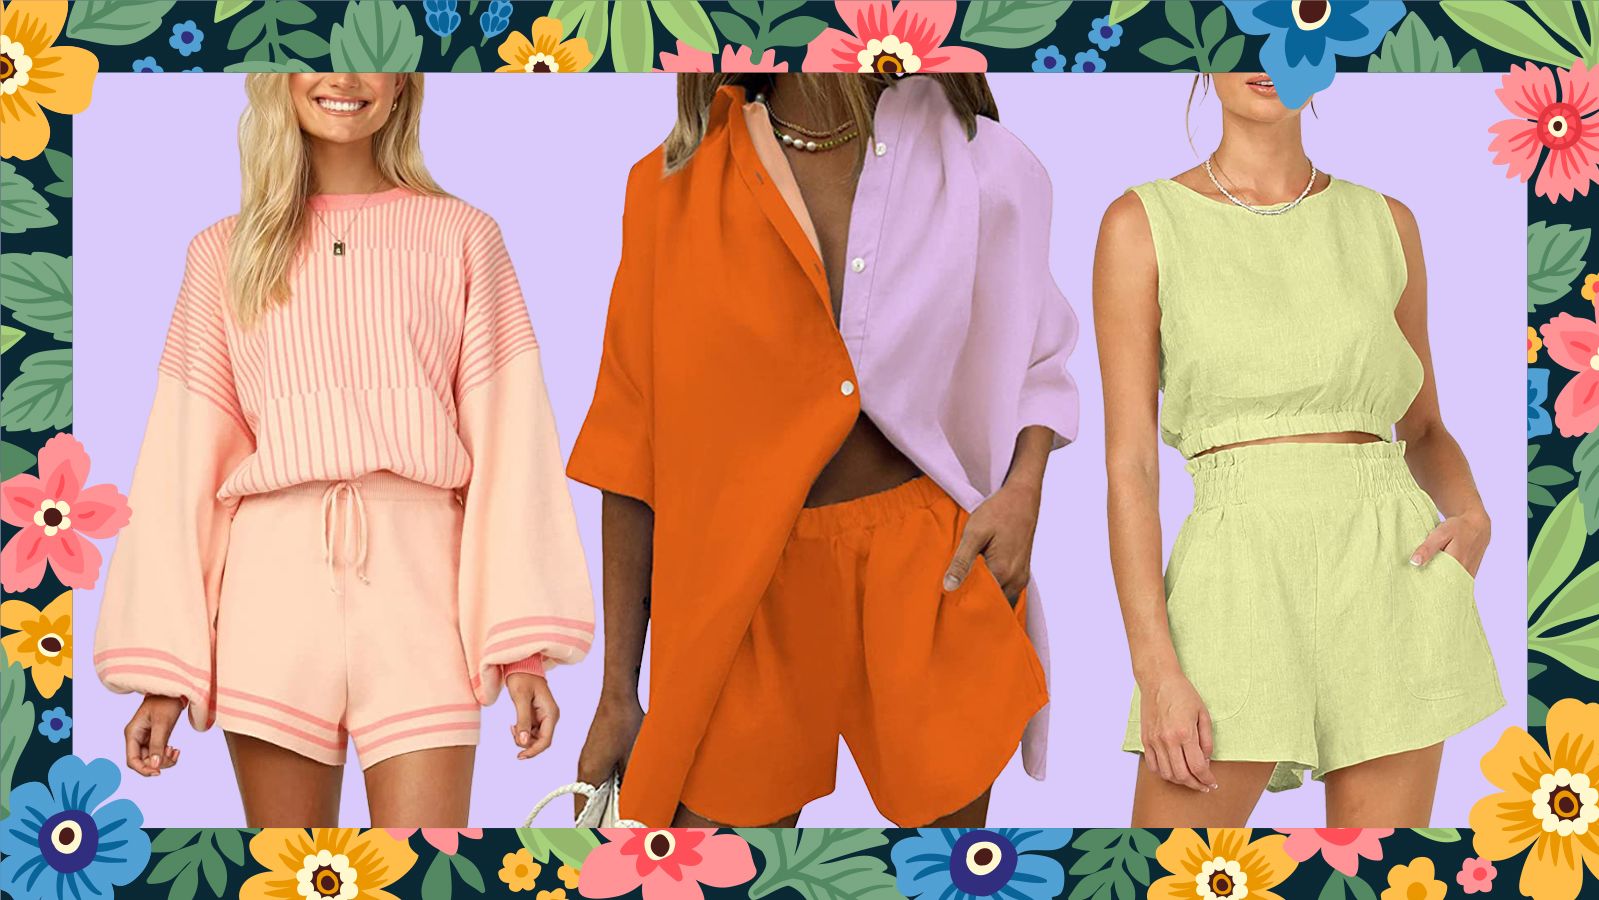 HOW TO STYLE A CO-ORD (so it doesn't look like pyjamas!) 